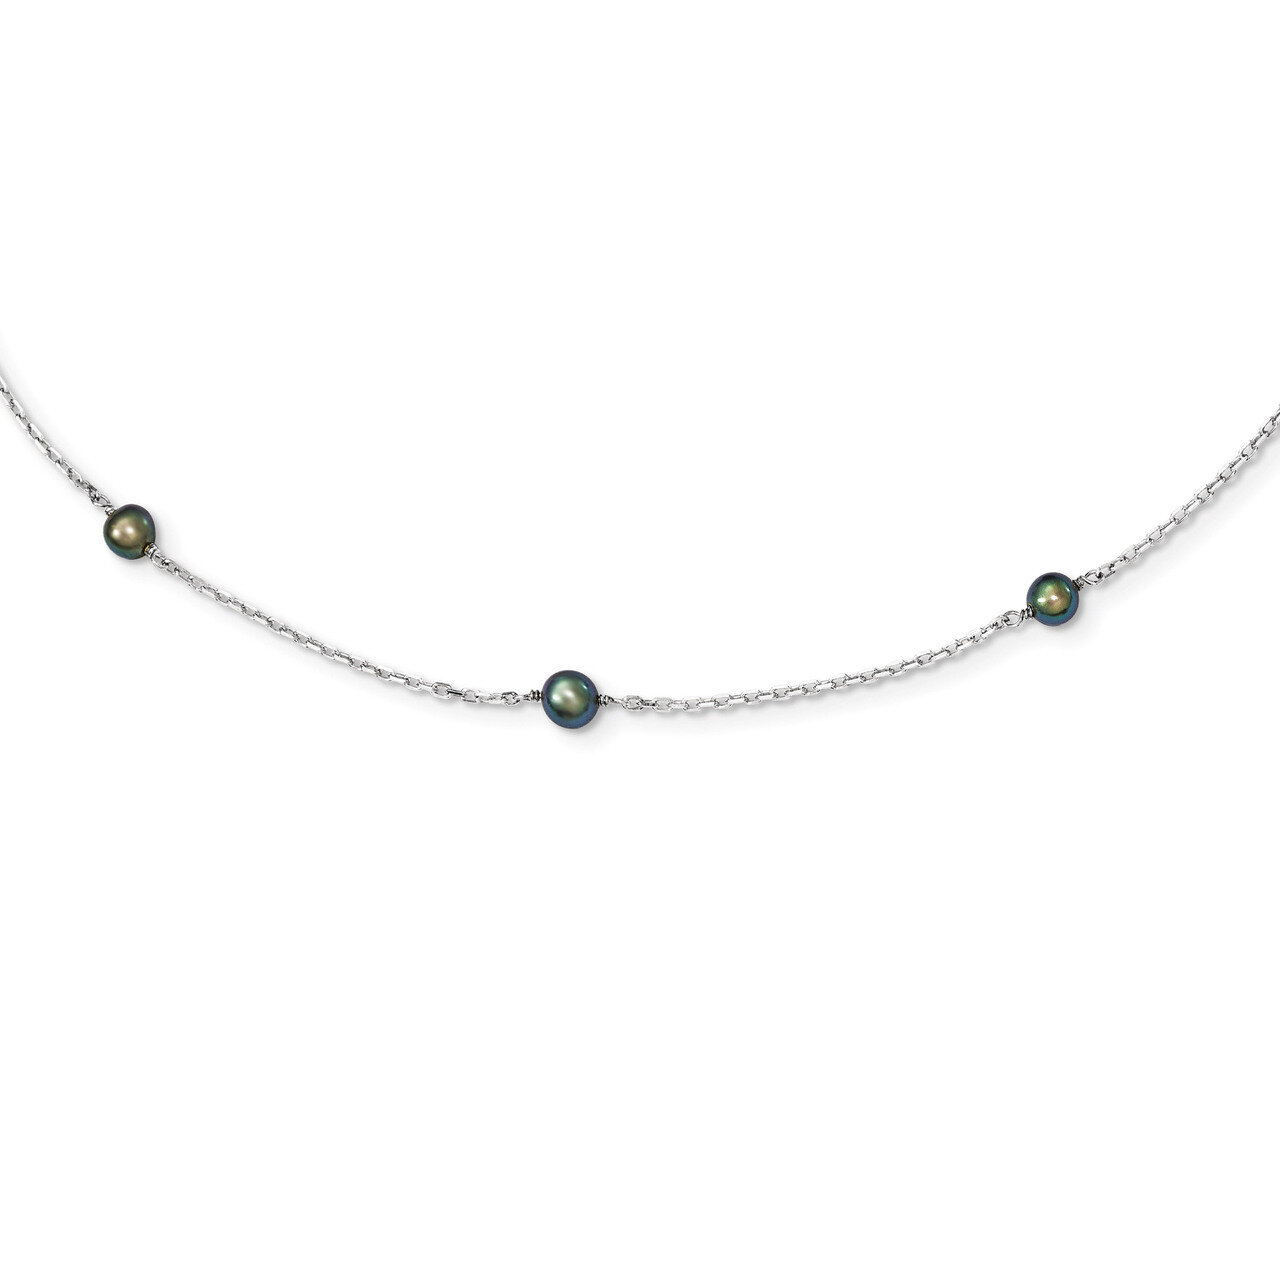 16 Inch Cultured Peacock Pearl Necklace Sterling Silver QH5019-16